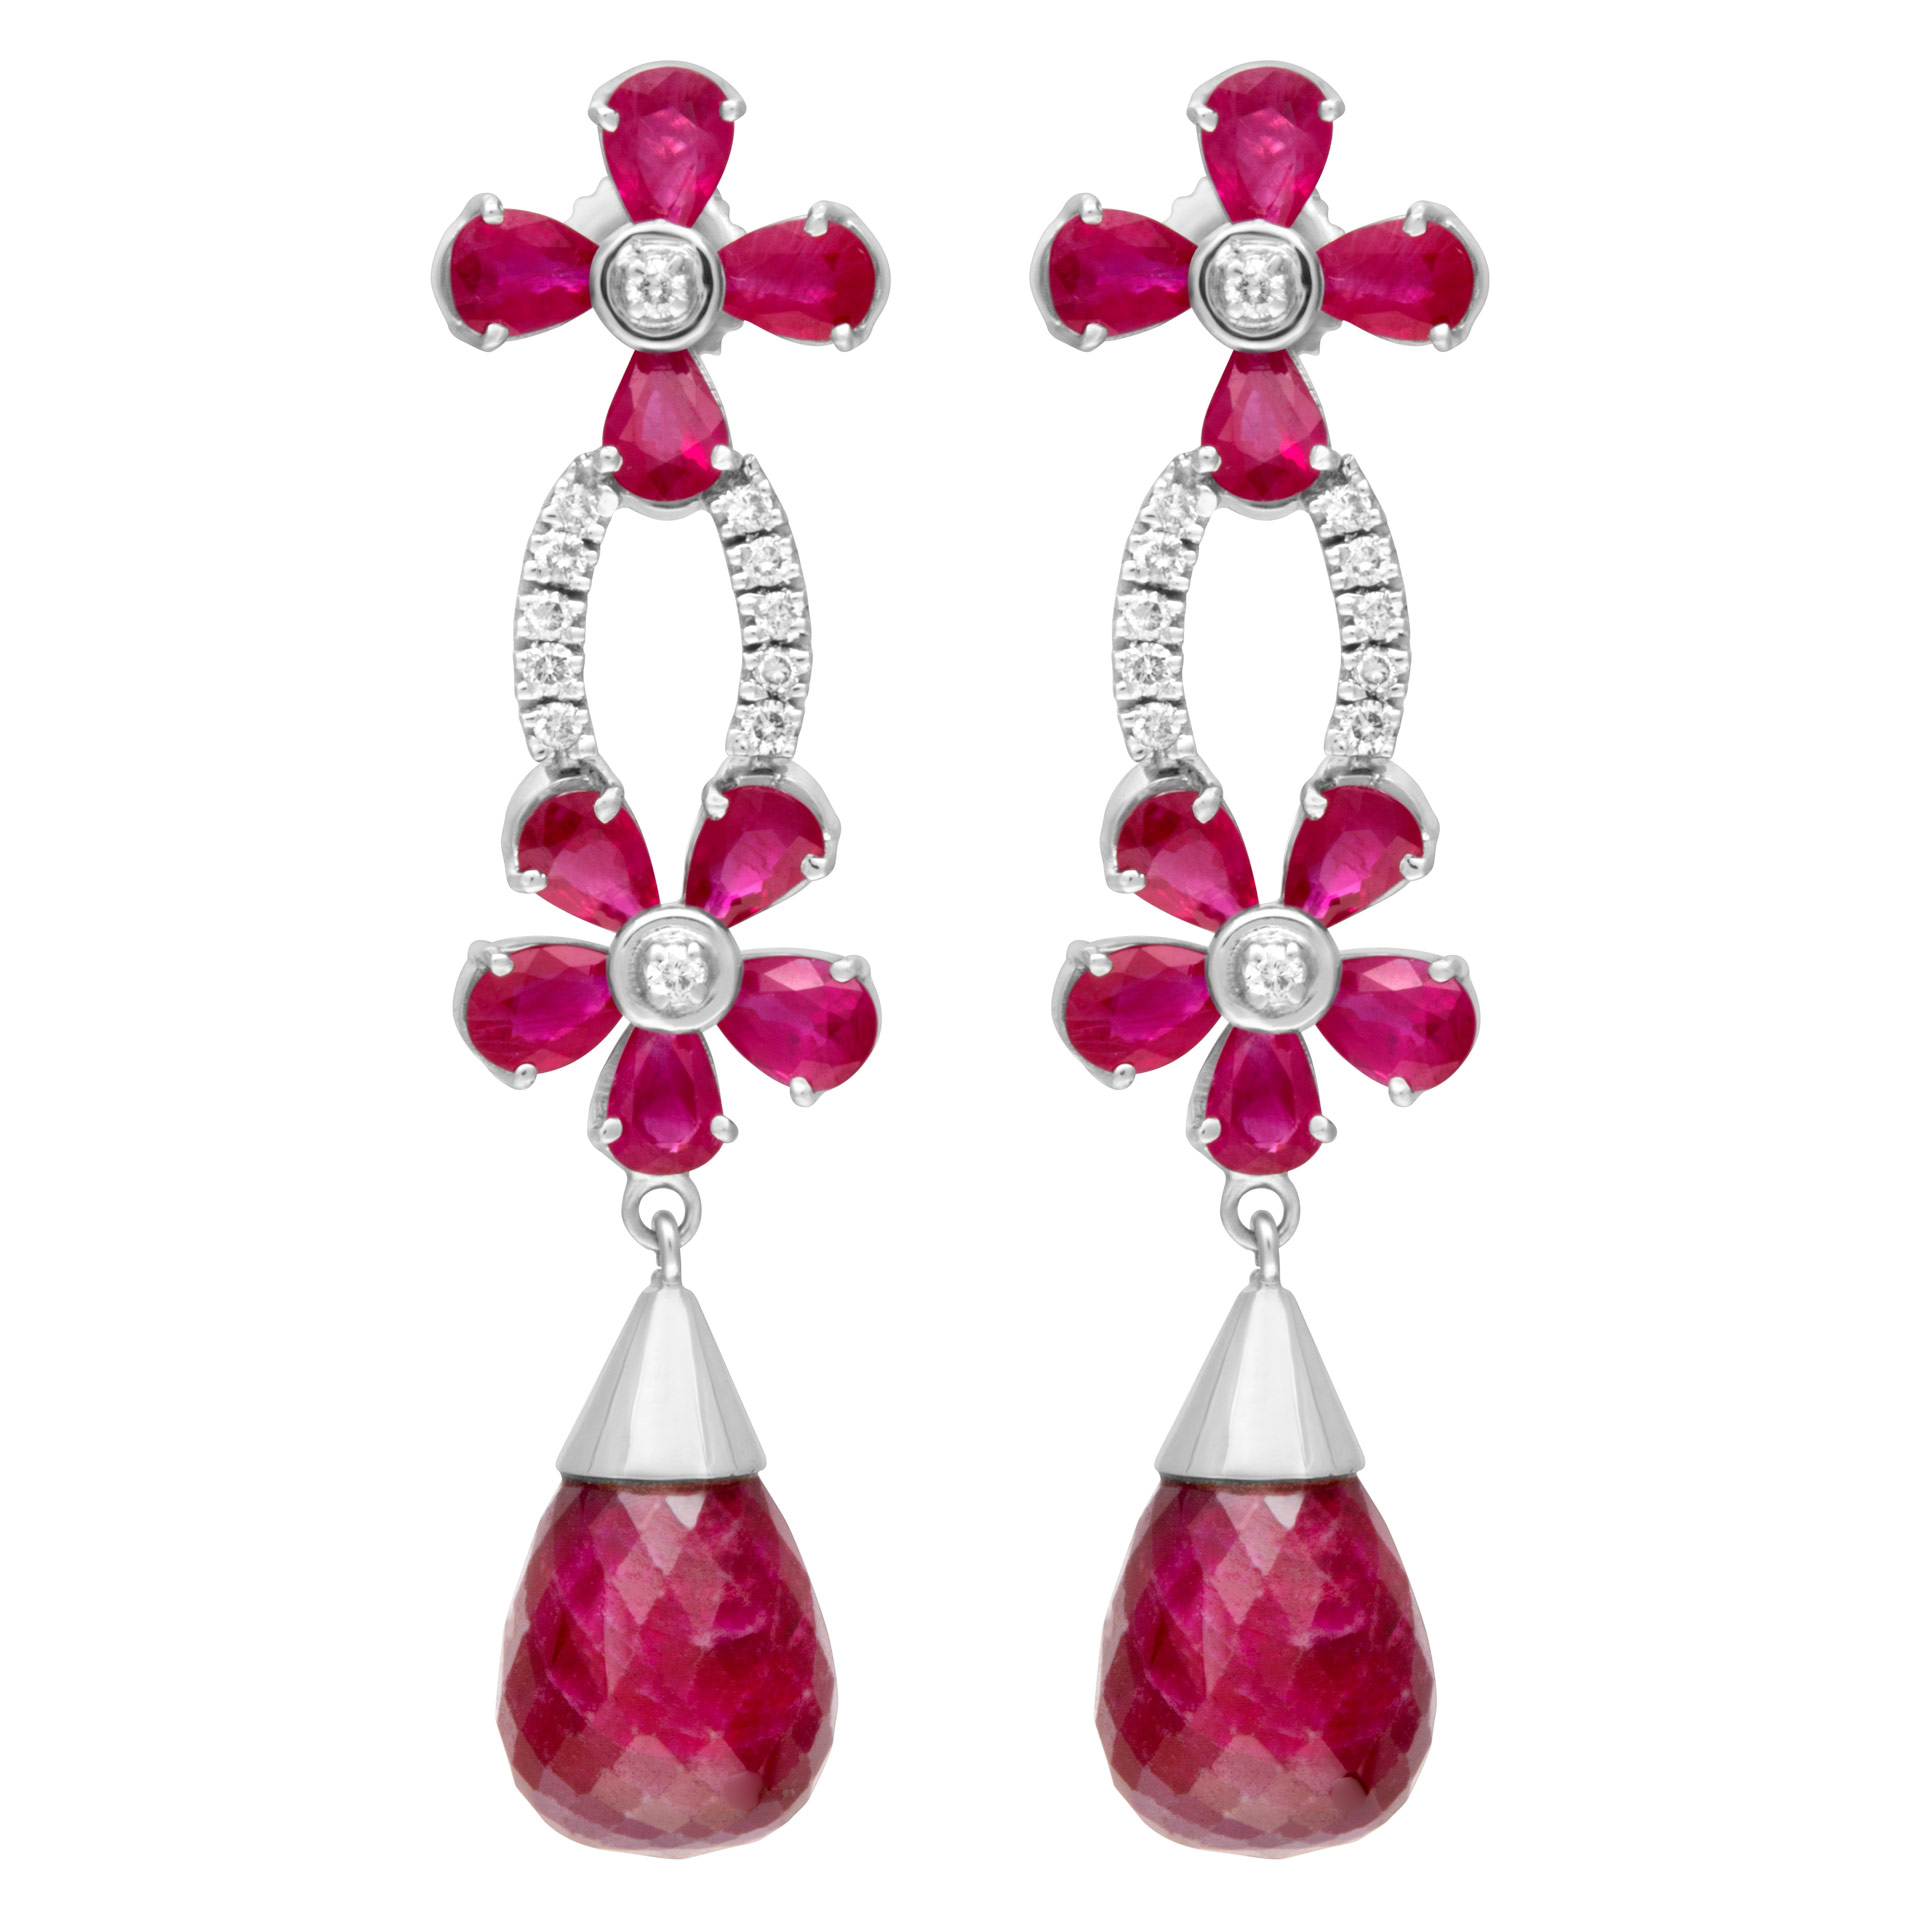 Dangling ruby and diamond earrings in 18k white gold